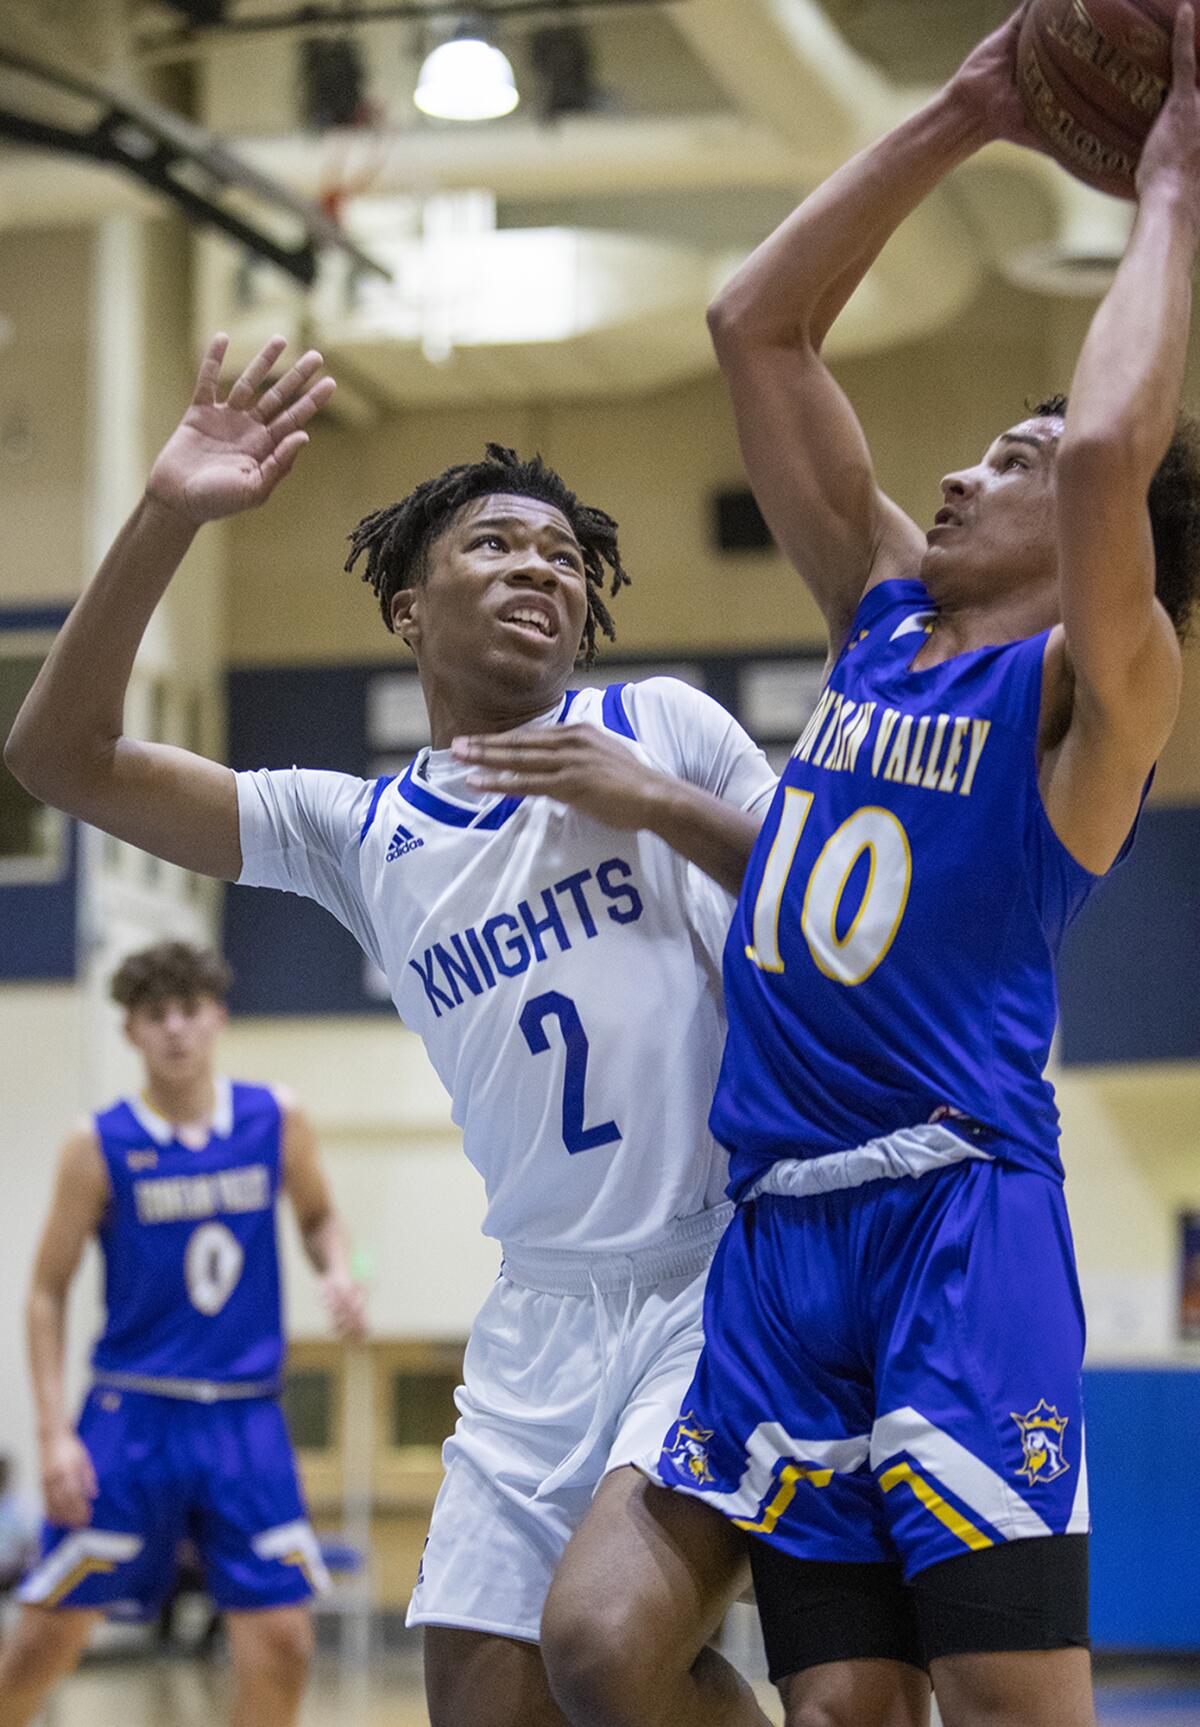 Fountain Valley's Roddie Anderson goes up for a shot against Price's Yahsani Humphreys during the quarterfinals of the CIF State Southern California Regional Division III playoffs on Thursday.